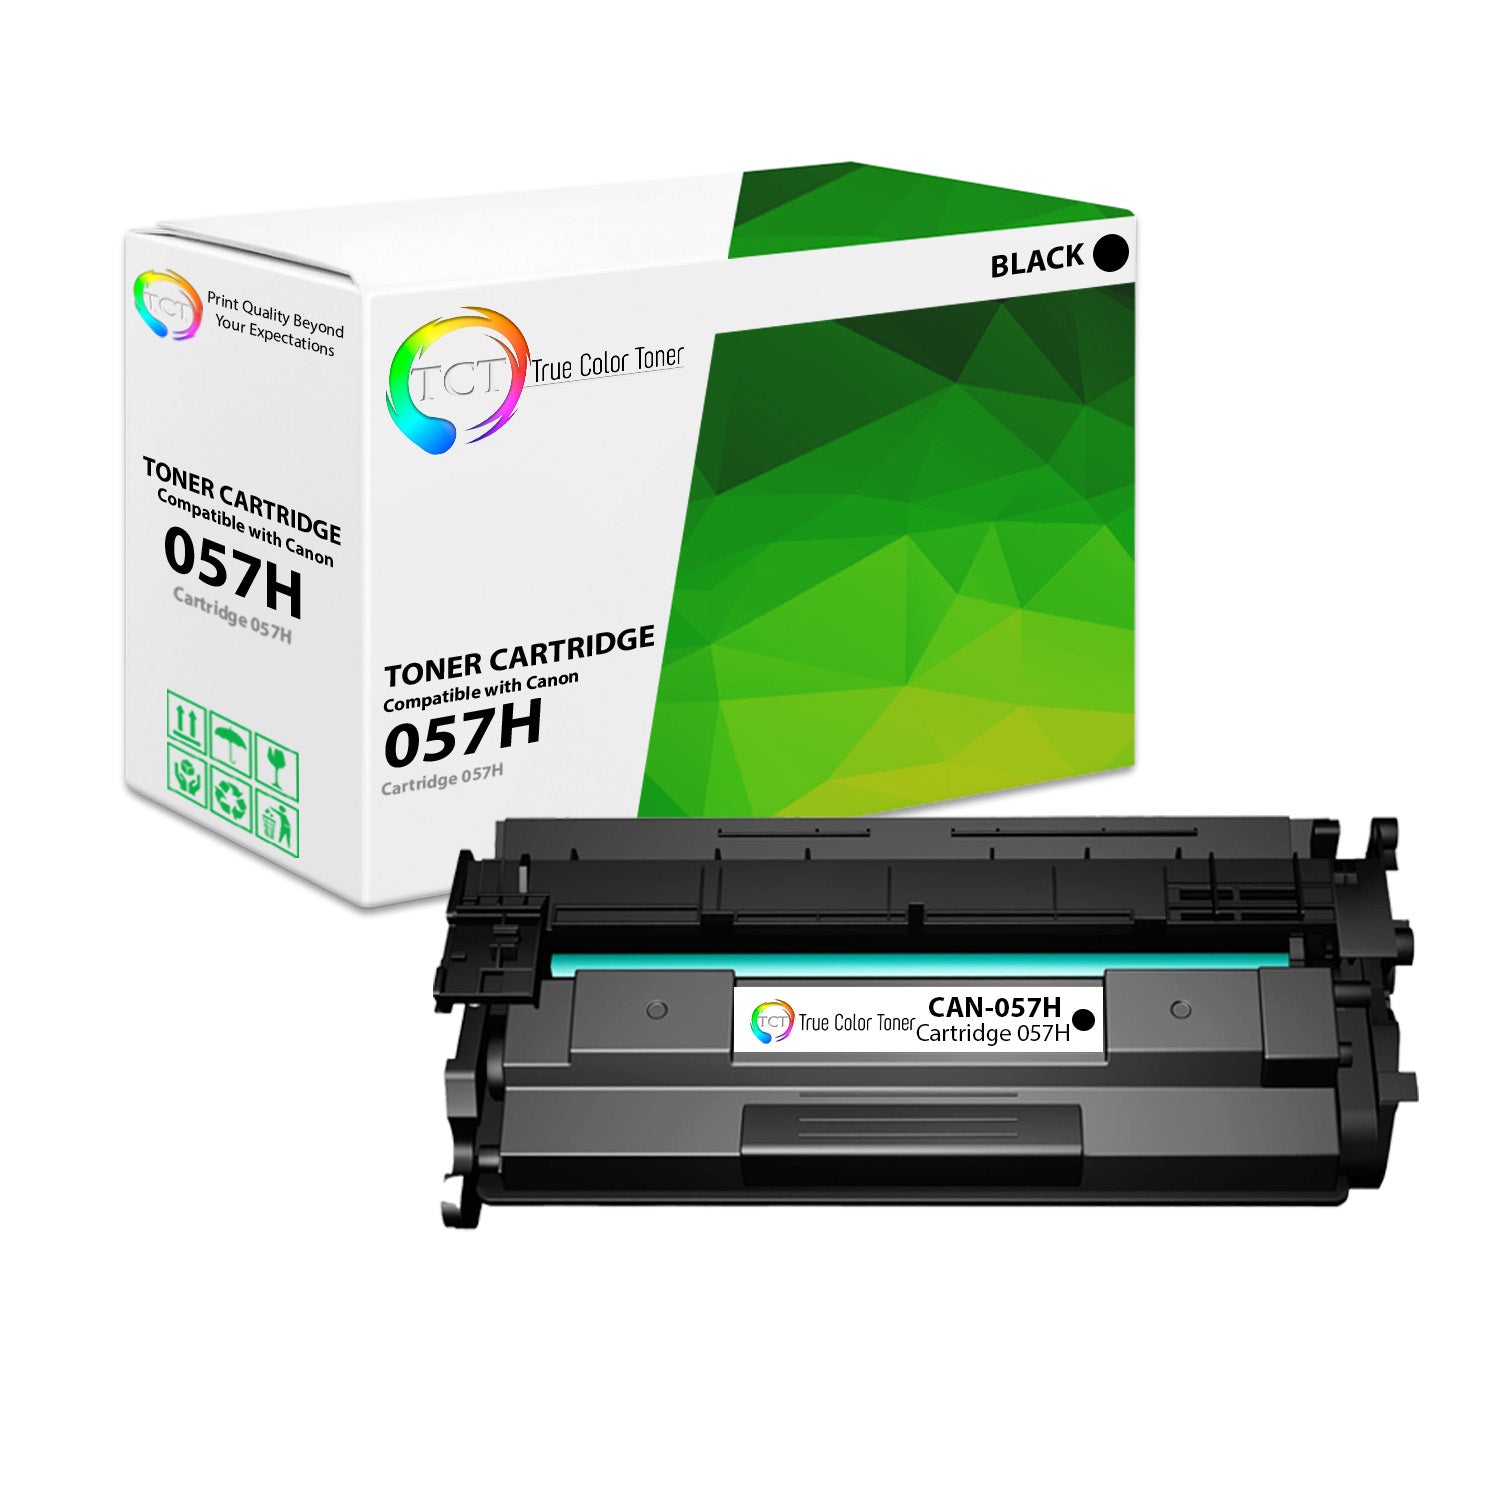 TCT Compatible Toner Cartridge Replacement for the  Series -